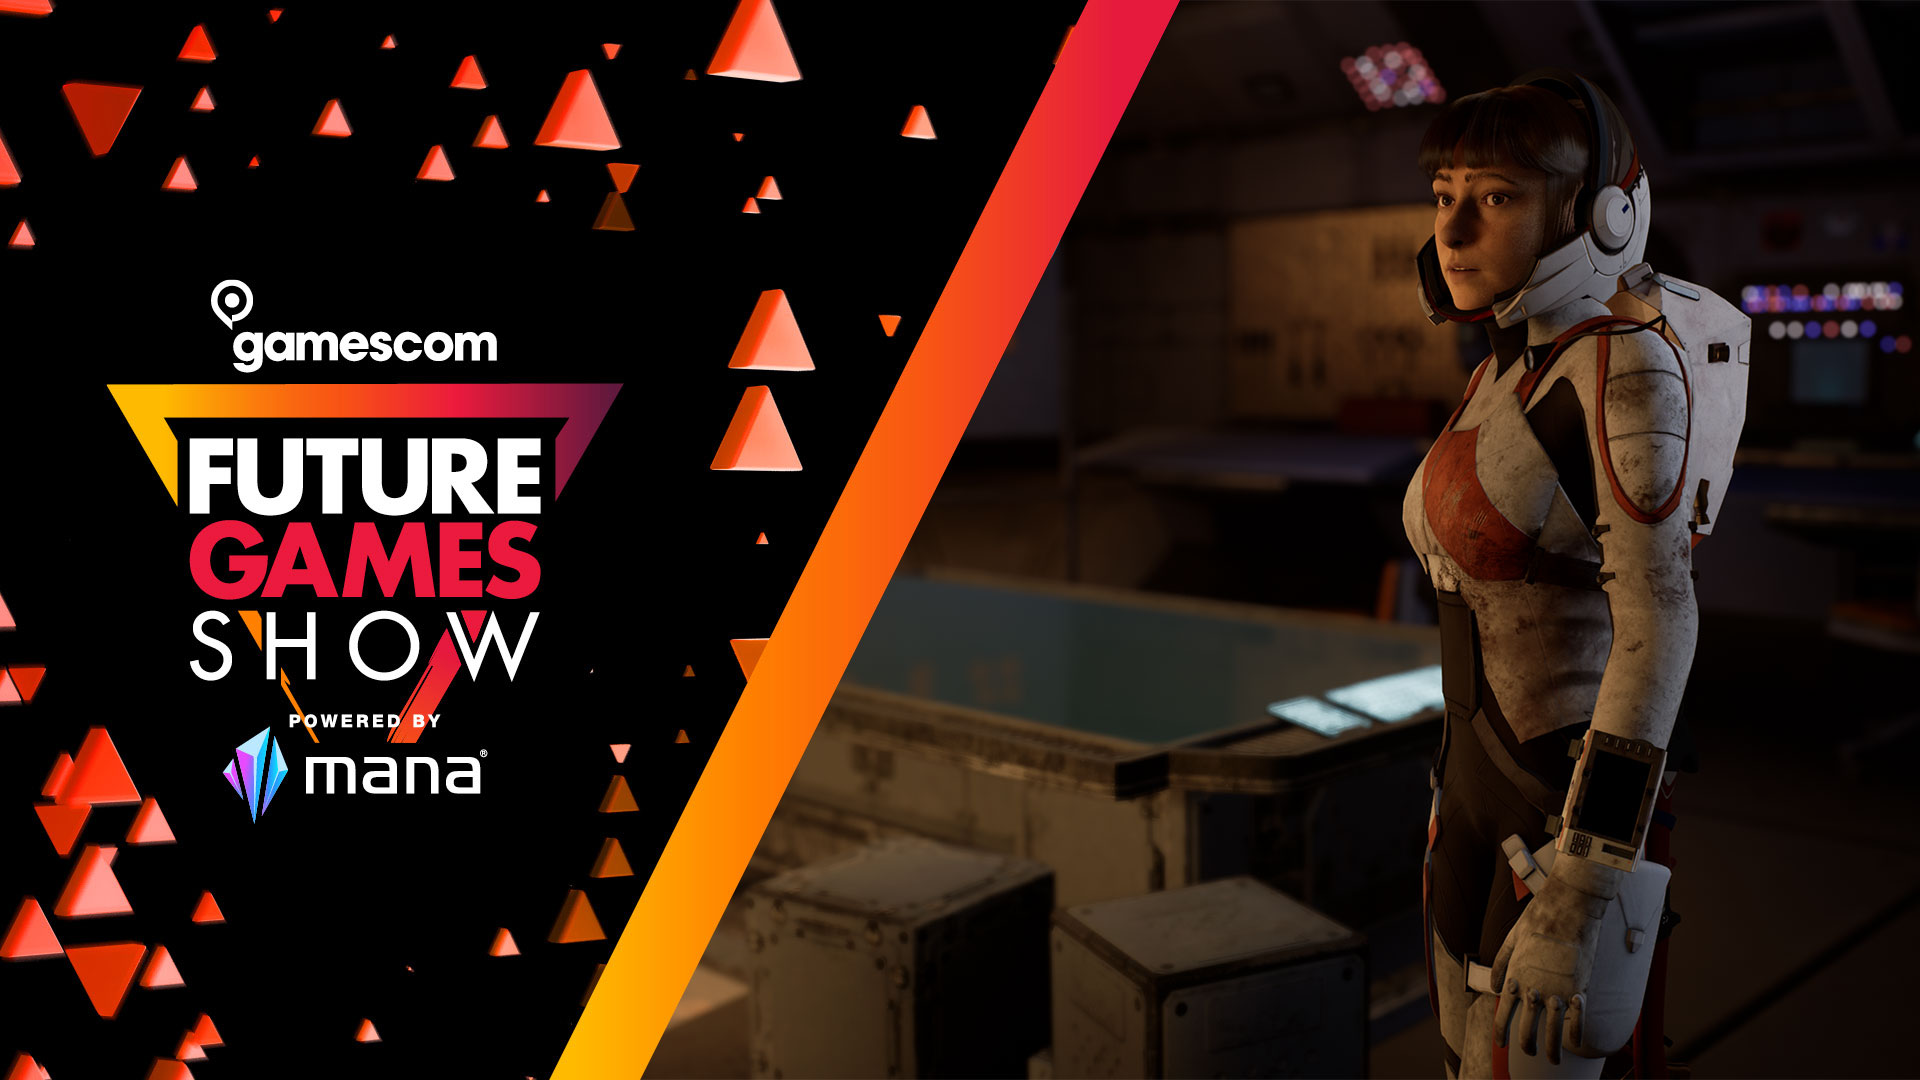 Deliver Us Mars appearing in the Future Games Show Gamescom showcase